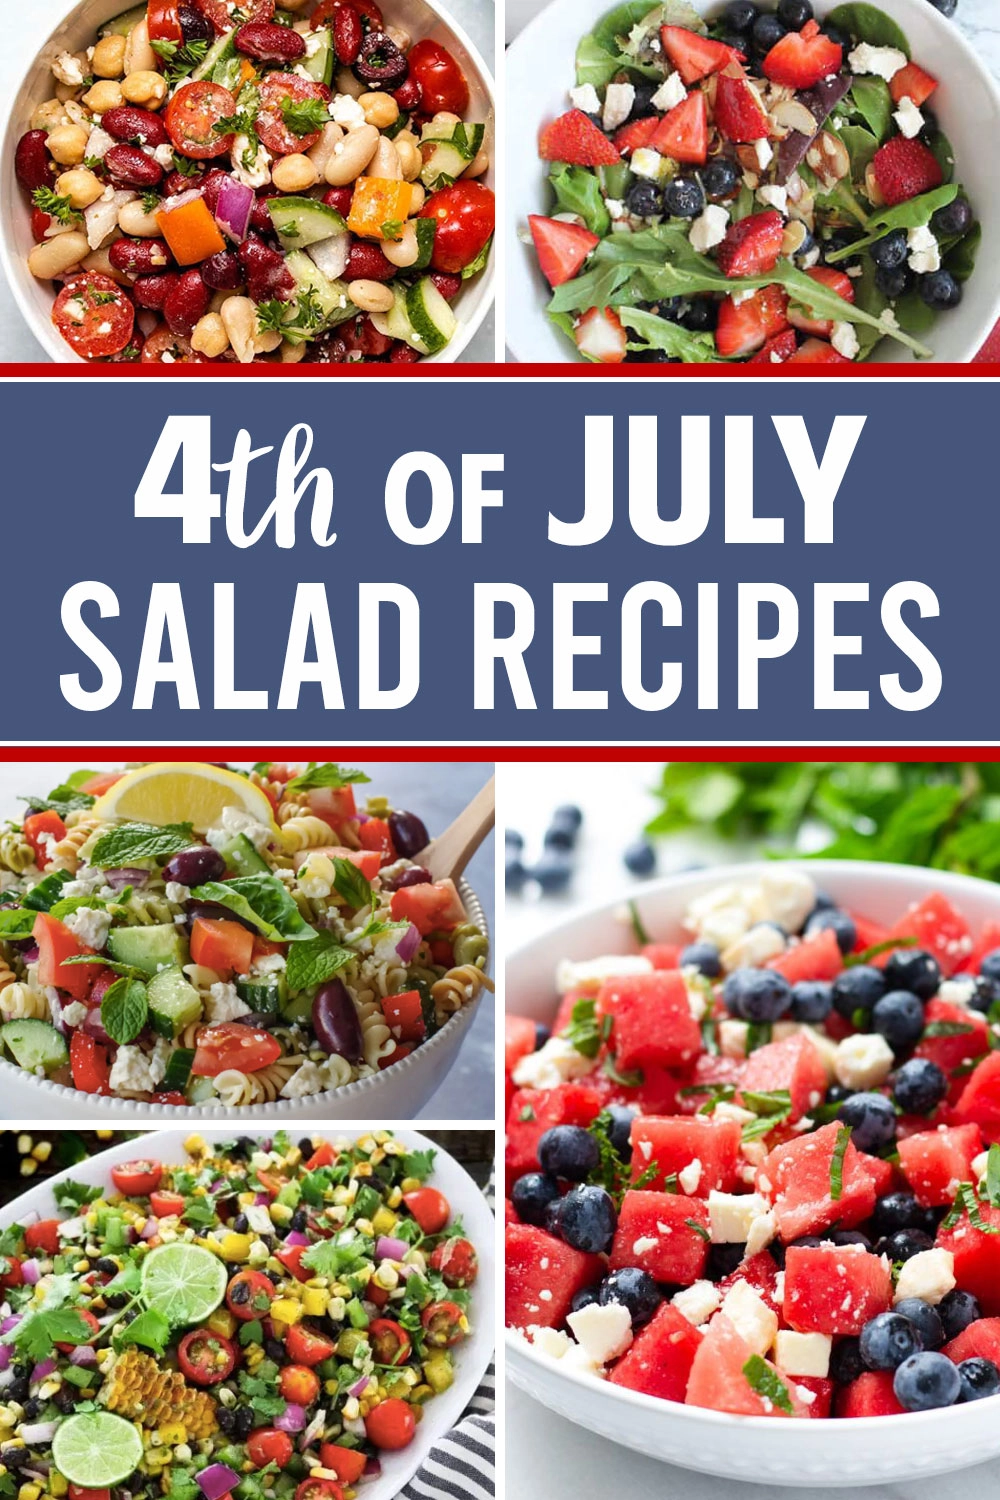 20 delicious salad recipes perfect for 4th of July.